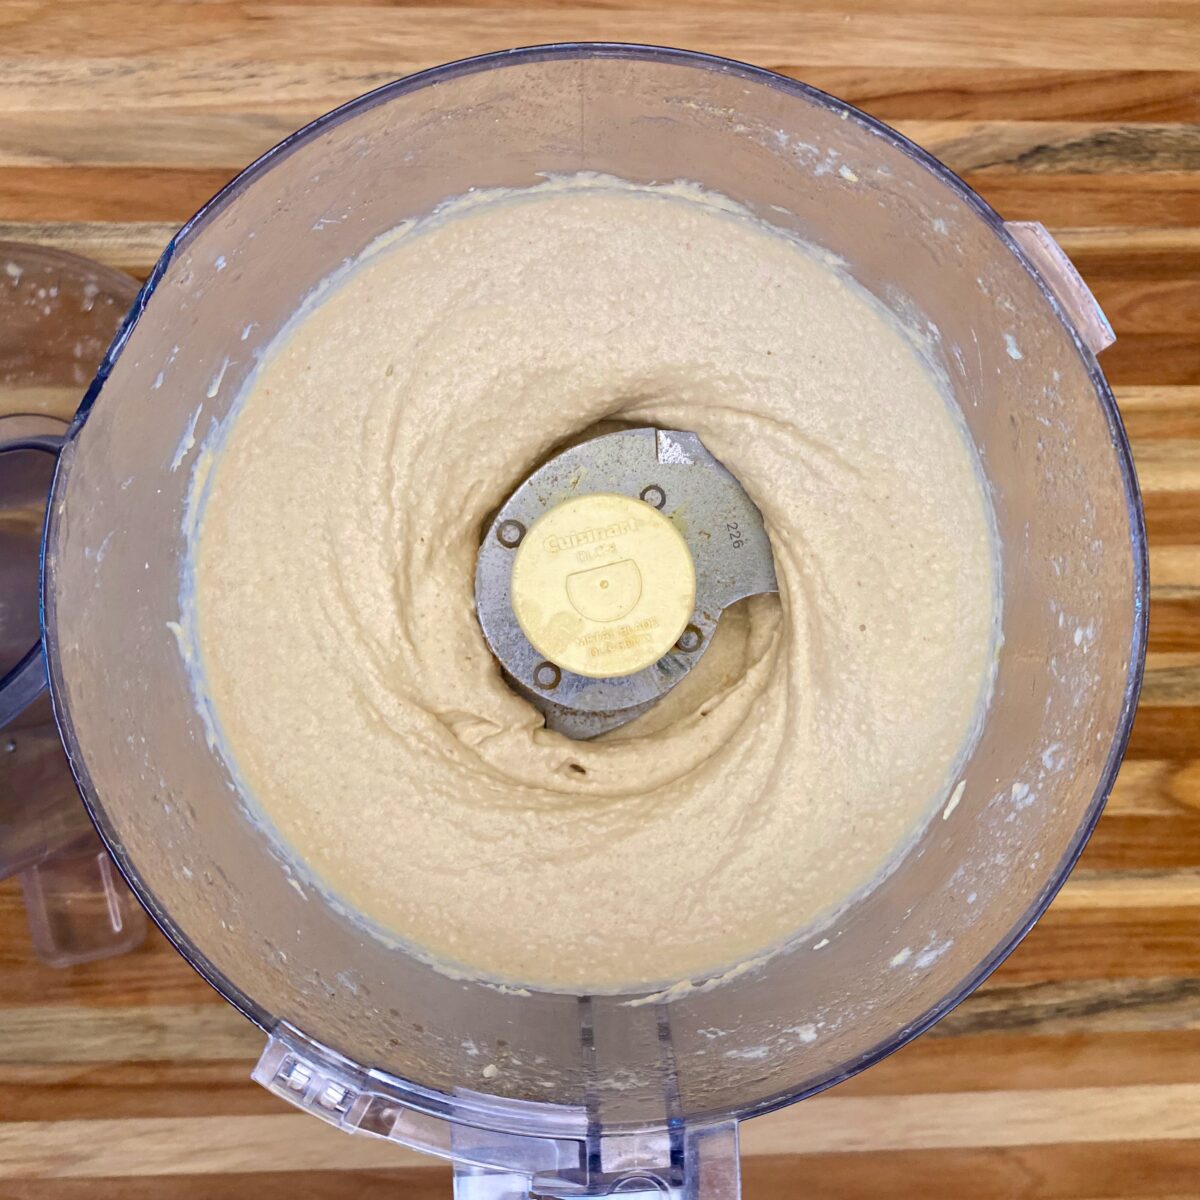 After 2 minutes of processing, the hummus is starting to look creamy.